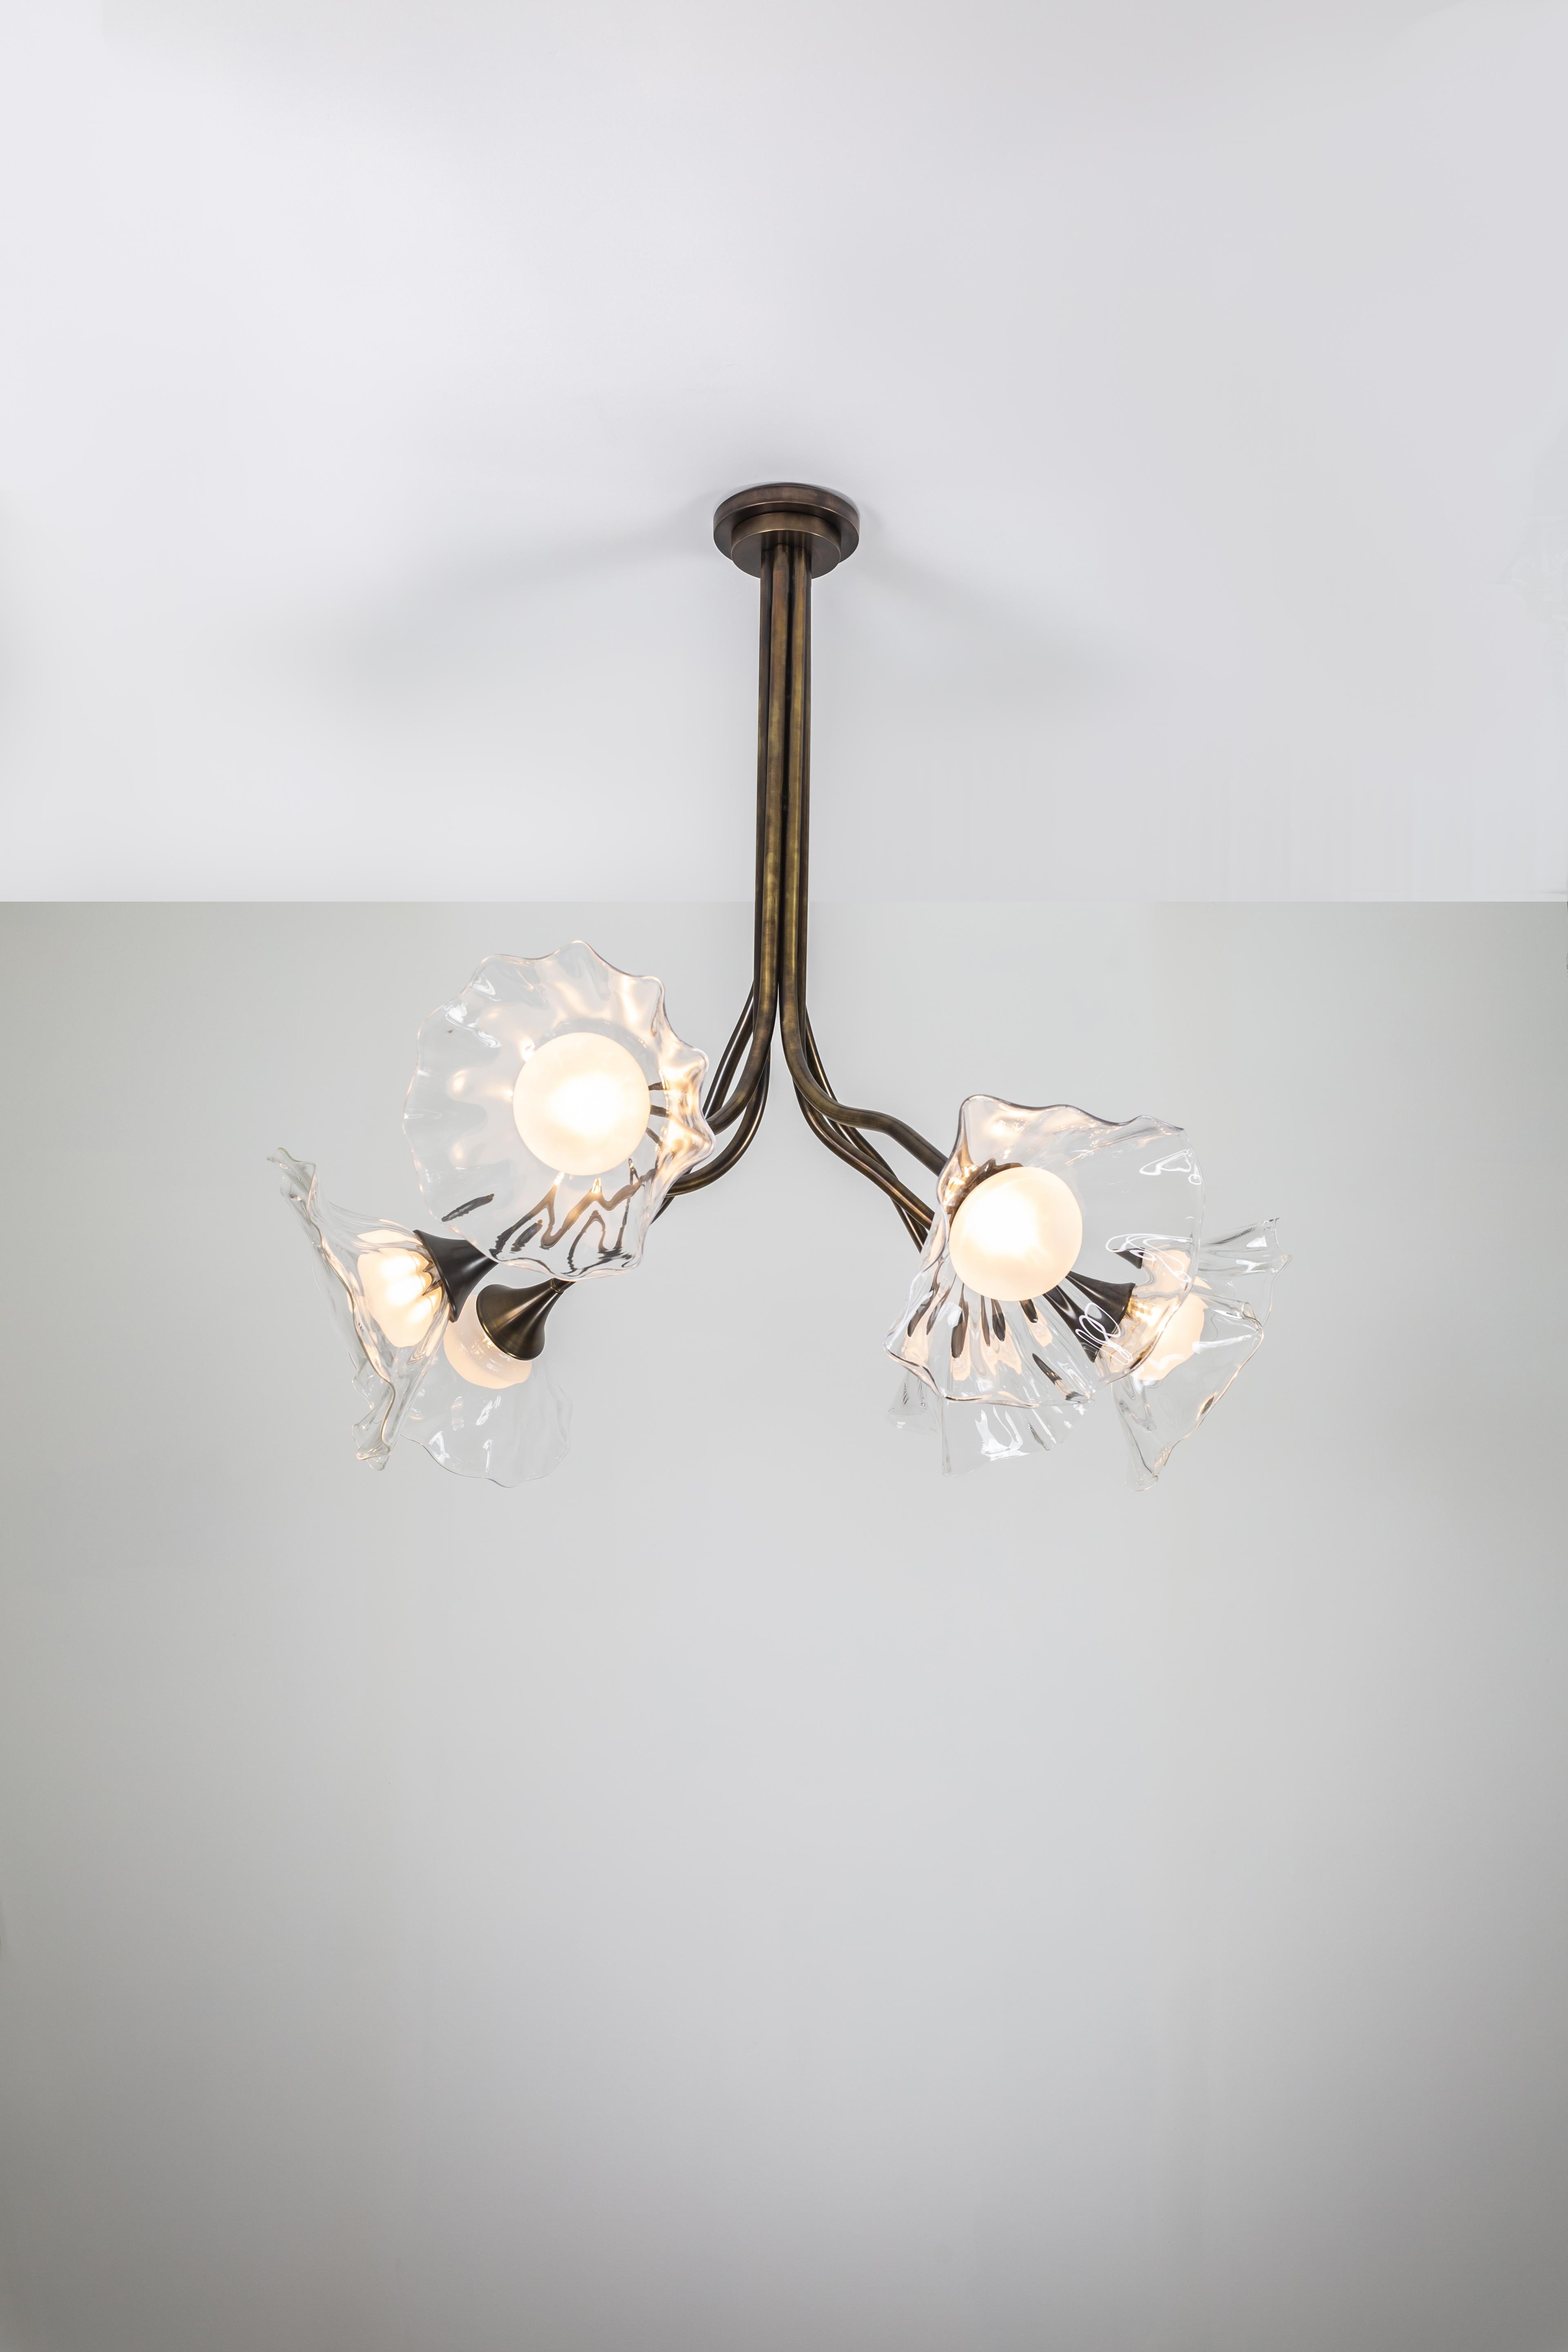 Kalin Asenov designs and fabricates lighting in Savannah, GA. Asenov works with a team of artisans and manufacturers to prototype and build all pieces in his studio.

The clear organic inspiration of Bloom is juxtaposed to the machined brass